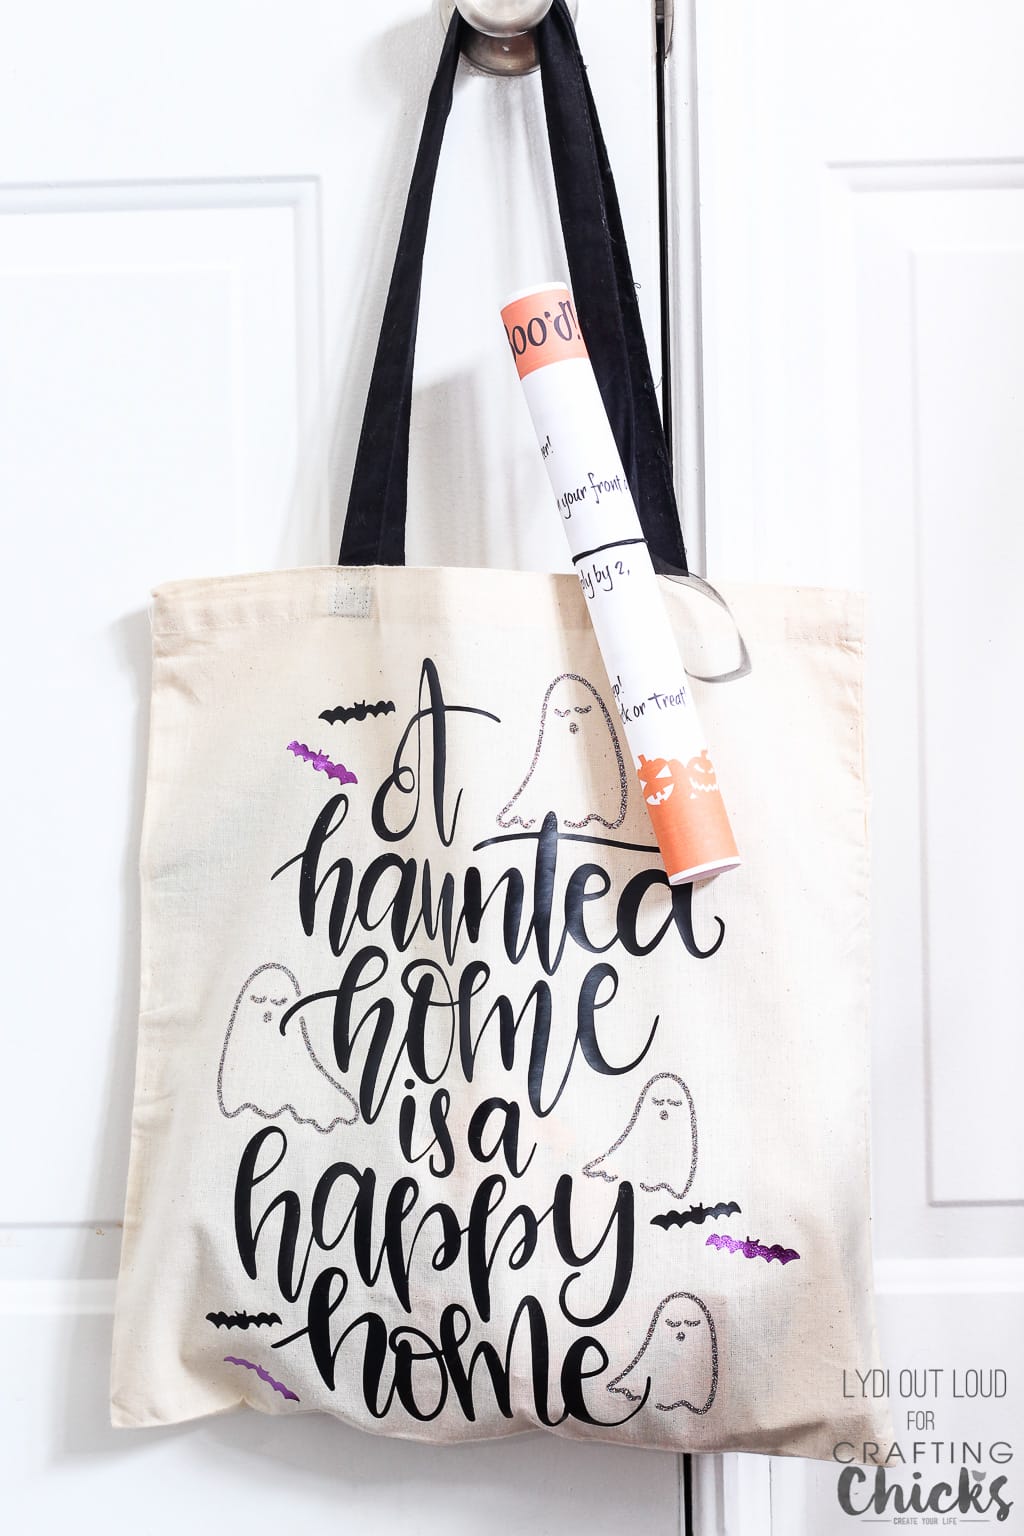 Boo your neighbors with an adorable Halloween tote bag! #Halloween #YouveBeenBood #HalloweenNeighbor Gifts